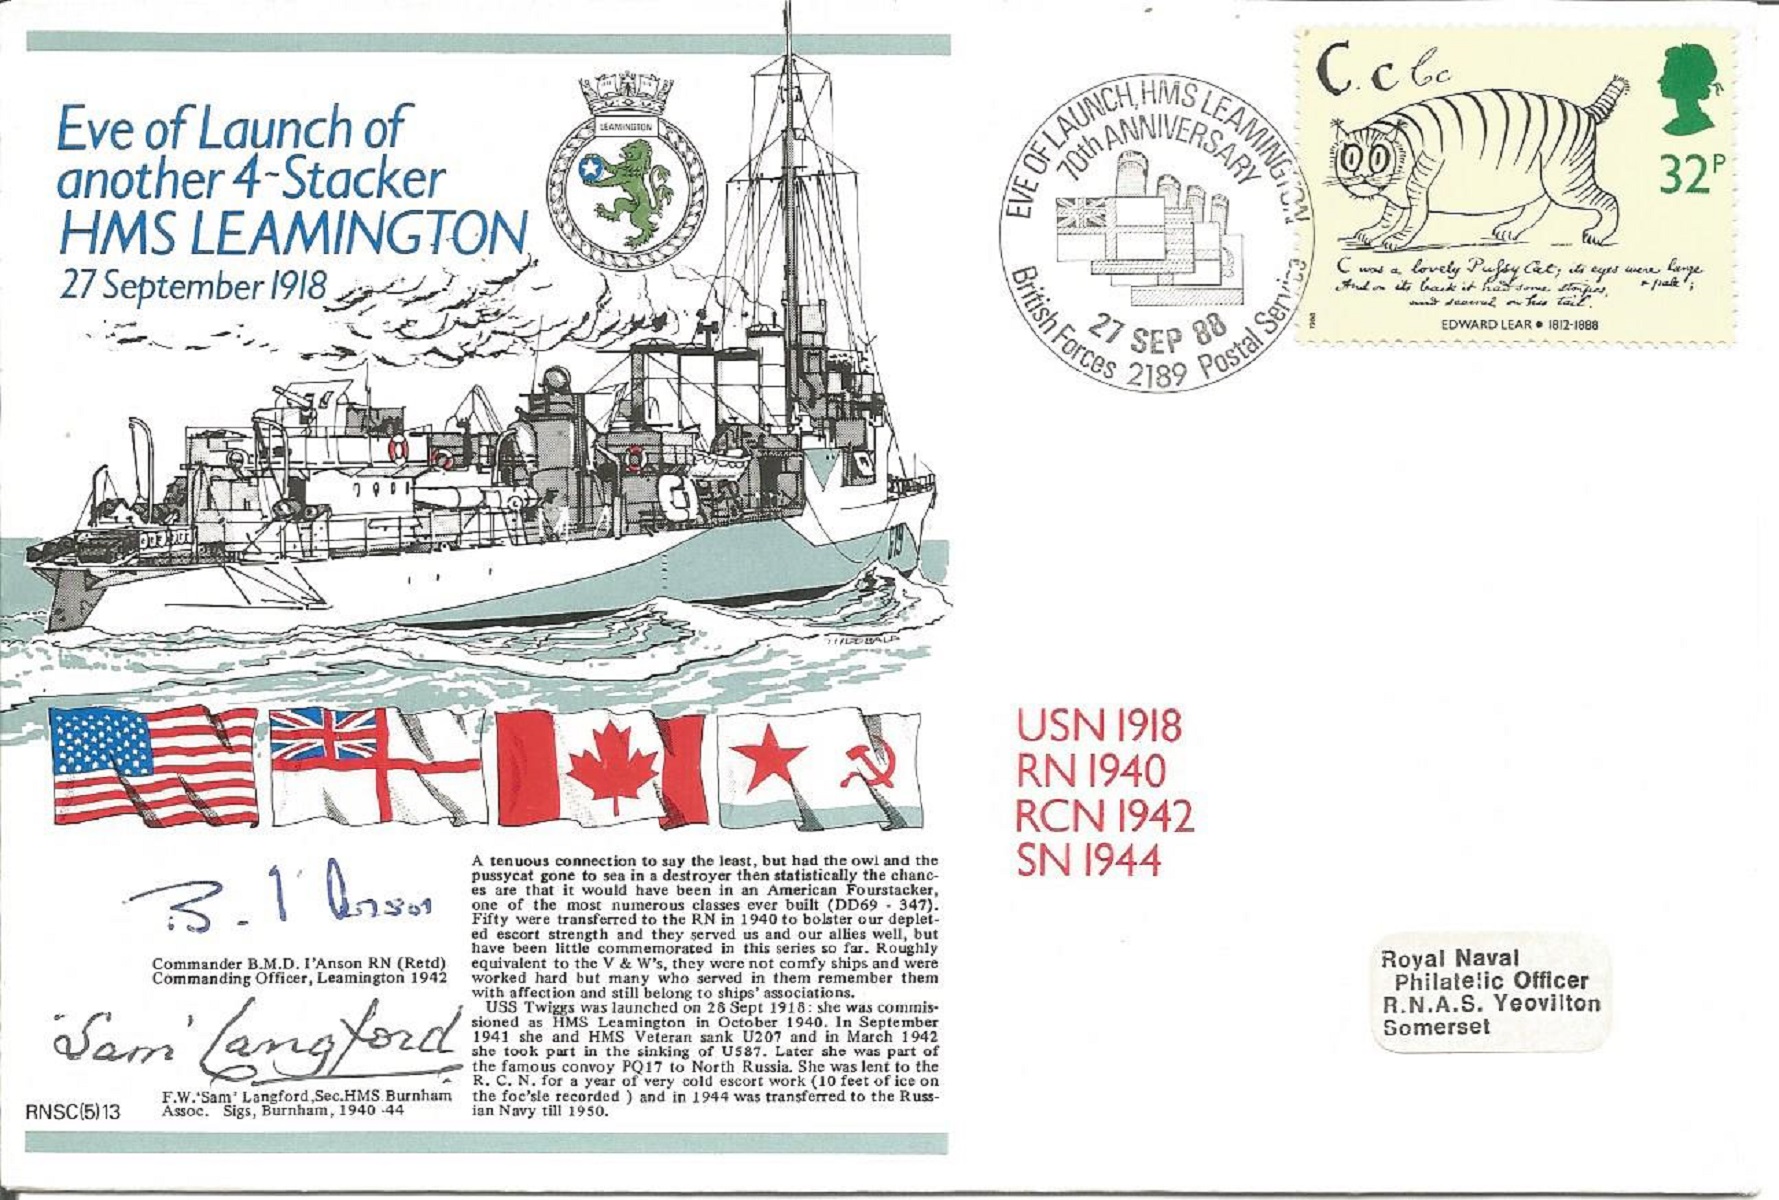 Commander B M D I'Anson and F W Sam Langford signed RNSC(5)13 cover commemorating the Eve of